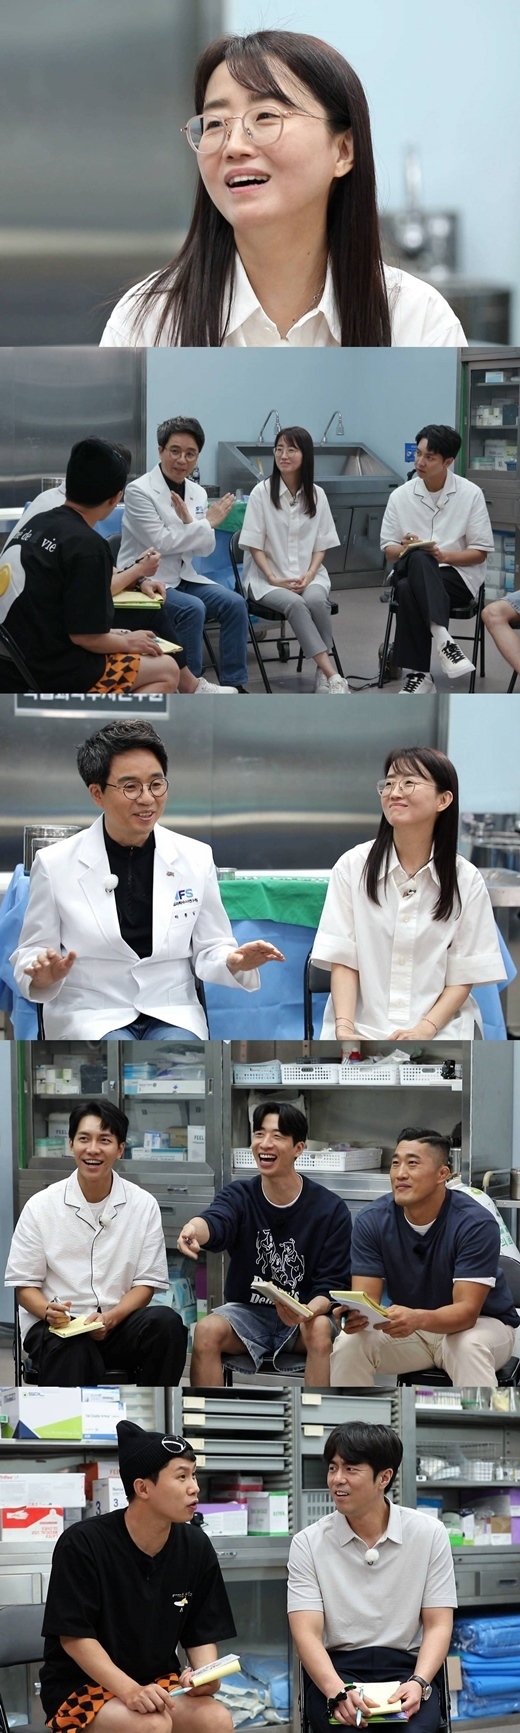 Kim Eun-hee, the master of the Genre Animals drama, appears as a master and presents a one-day class.On SBS All The Butlers, which will be broadcast on September 5, members will be revealed to be handed down to the top class of Korea, How to Write, as a daily writer team of Master Kim Eun-hee.At the recent shooting site, Kim Eun-hee presented his own creative know-how, such as Teed lightly and buttocks heavy to the members, and suggested that the traditional fairy tale be adapted into the Kim Eun-hee table Genre Animals as the final task.Kim Eun-hee made an extraordinary offer to give a special gift to the best member, burning the morale of the members.Amid all kinds of speculation about Gift, including drama appearance rights and Kingdom script book, the scene was a mess with the explosive reaction of members when Kim Eun-hee revealed the identity of Gift.It raises the question of what the first prize Gift, which caused a hot reaction, was.Members were also given a limited opportunity to get a glimpse of the birth secret of Kim Eun-hee writer table Genre Animals.Kim Eun-hees terrestrial debut drama Signs main character Park Shin-yang, and he met with the forensic officer Ha Hong-il of the National Institute of Scientific Investigation, who has inspired Kim Eun-hees Genre Animals with various advice.Kim Eun-hee expressed his gratitude to The Slap for a long time, and he revealed the story that he had trouble covering the past story.The members also began to immerse themselves in the coverage of Kim Eun-hee for the perfect Genre Animals adaptation.But I was frustrated with the coverage that is not easier than I thought.In particular, Yang said, Imagination is declining, and showed sympathy for Kim Eun-hees coverage.